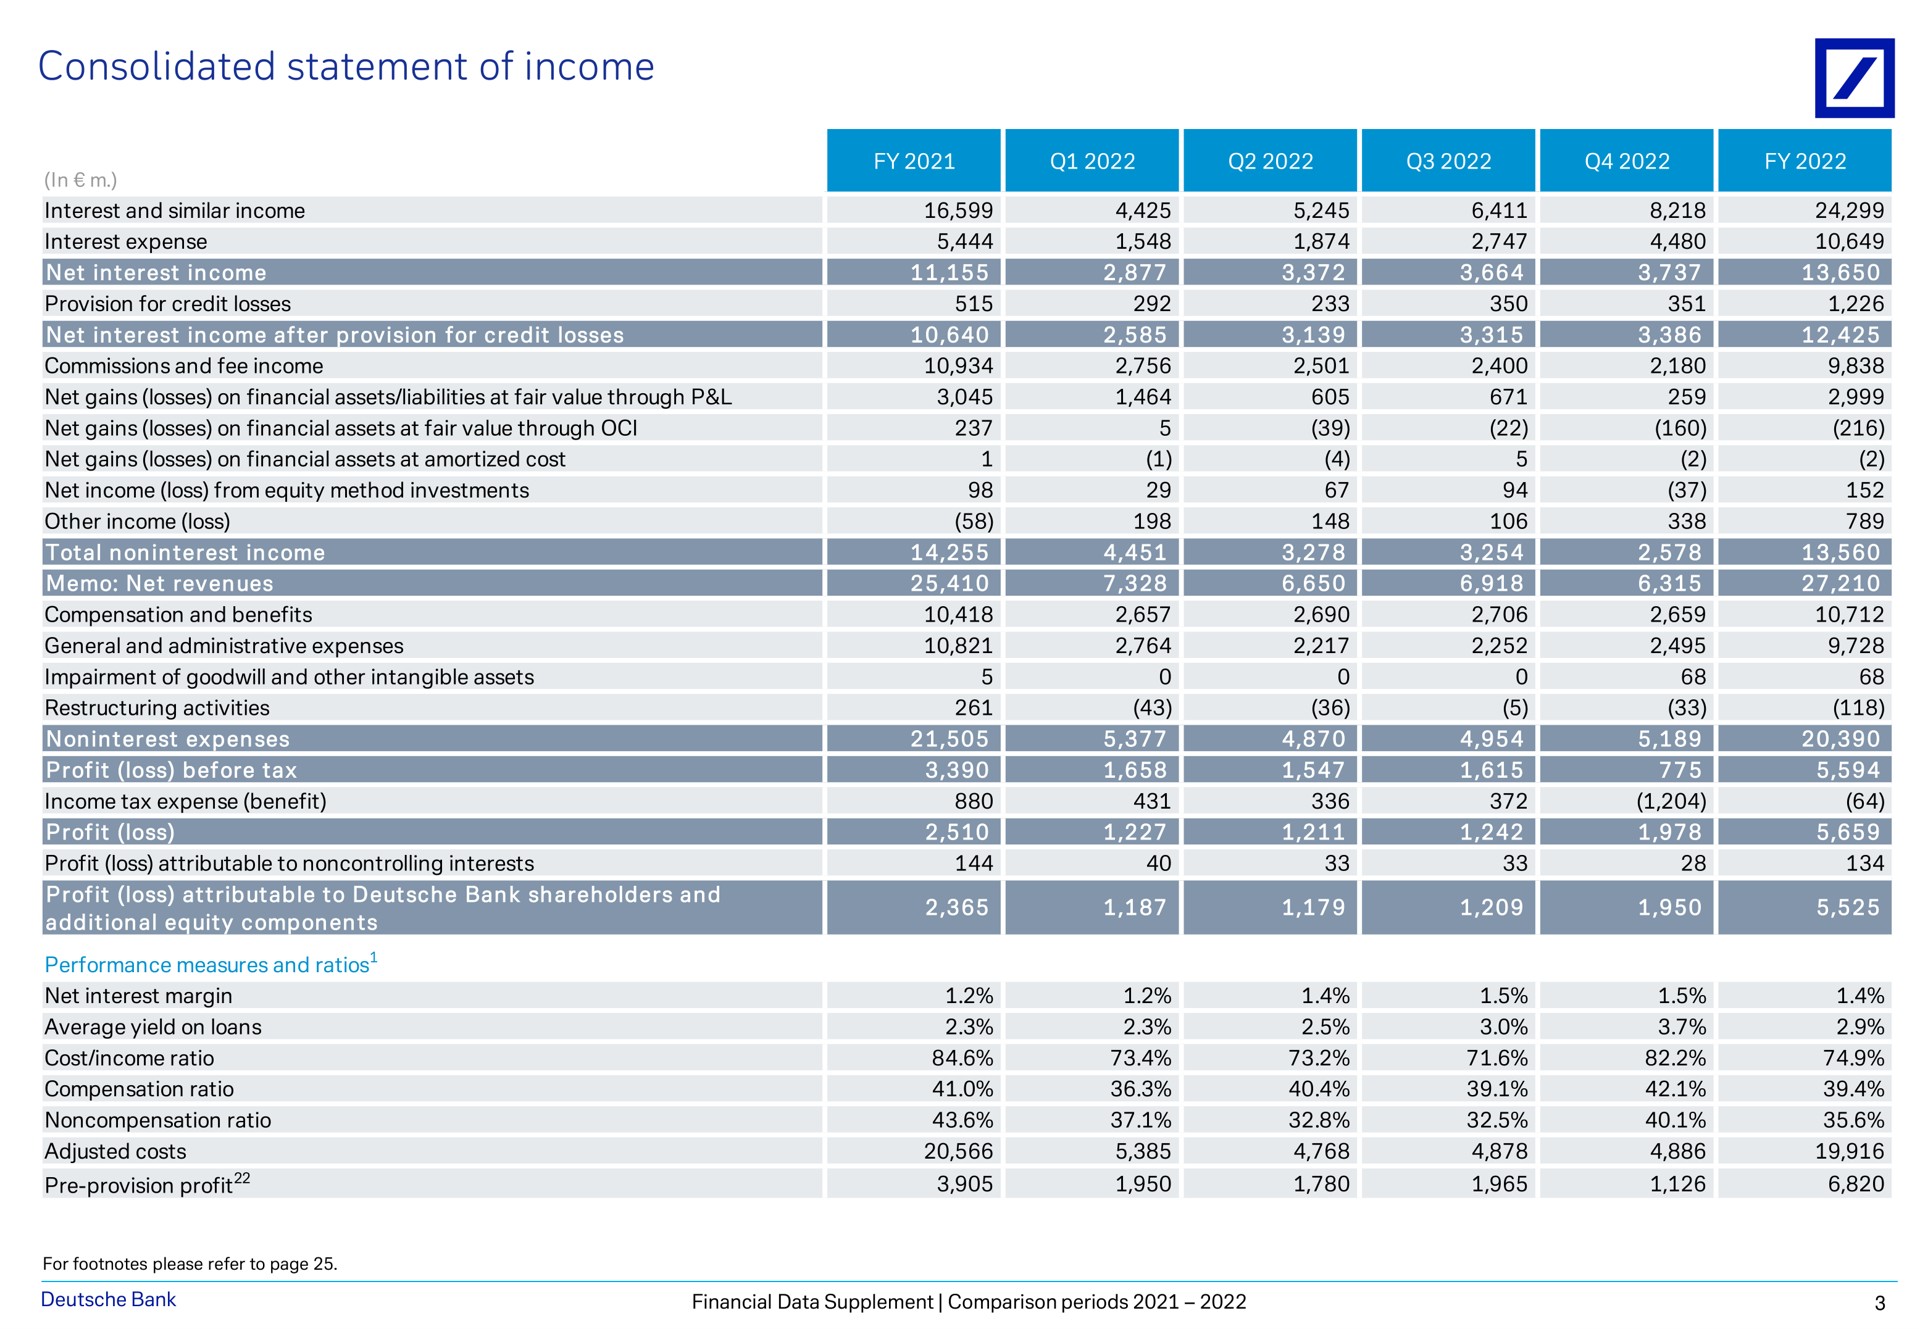 consolidated statement of income provision profit a a as | Deutsche Bank